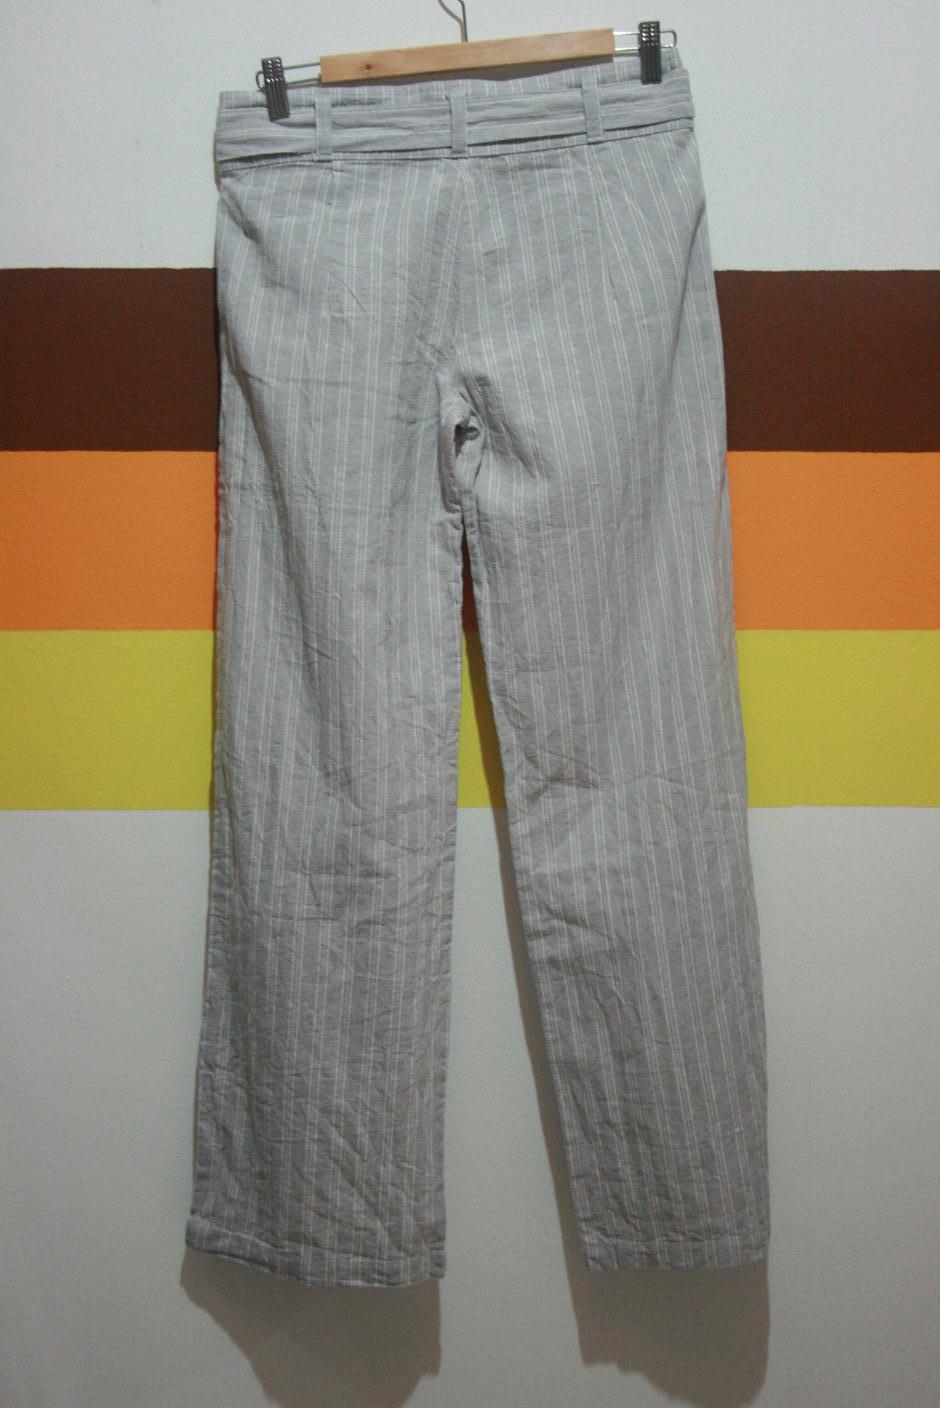 SecondHand Cabin: Hush Puppies loose straight pants in stripe prints ...